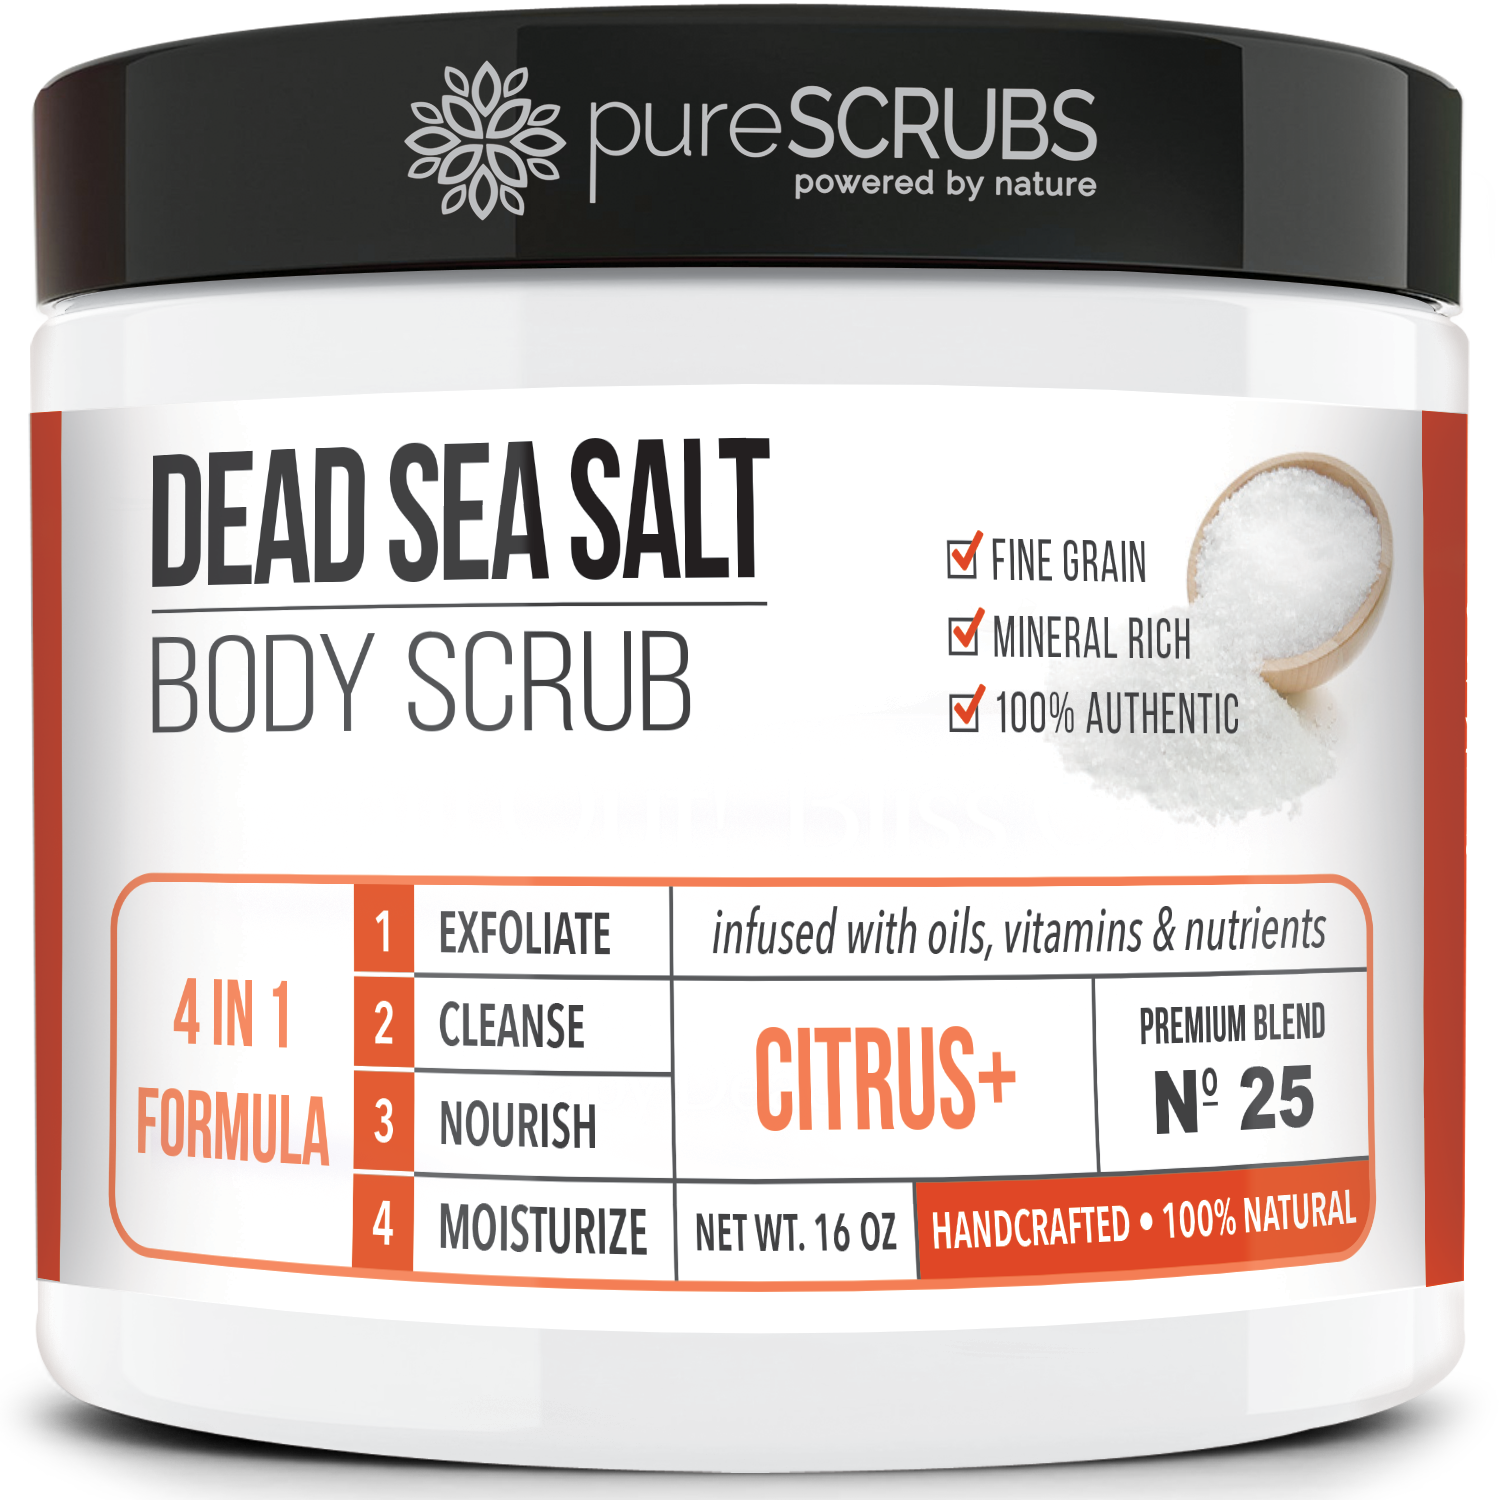 purescrubs 16oz jar Premium Blend #25 citrus dead sea salt body scrub to exfoliate your skin comes with free loofah pad free exfoliating organic oatmeal bar soap shea butter and honey and free eco-friendly bamboo spoon to stir and scoop out the scrub 